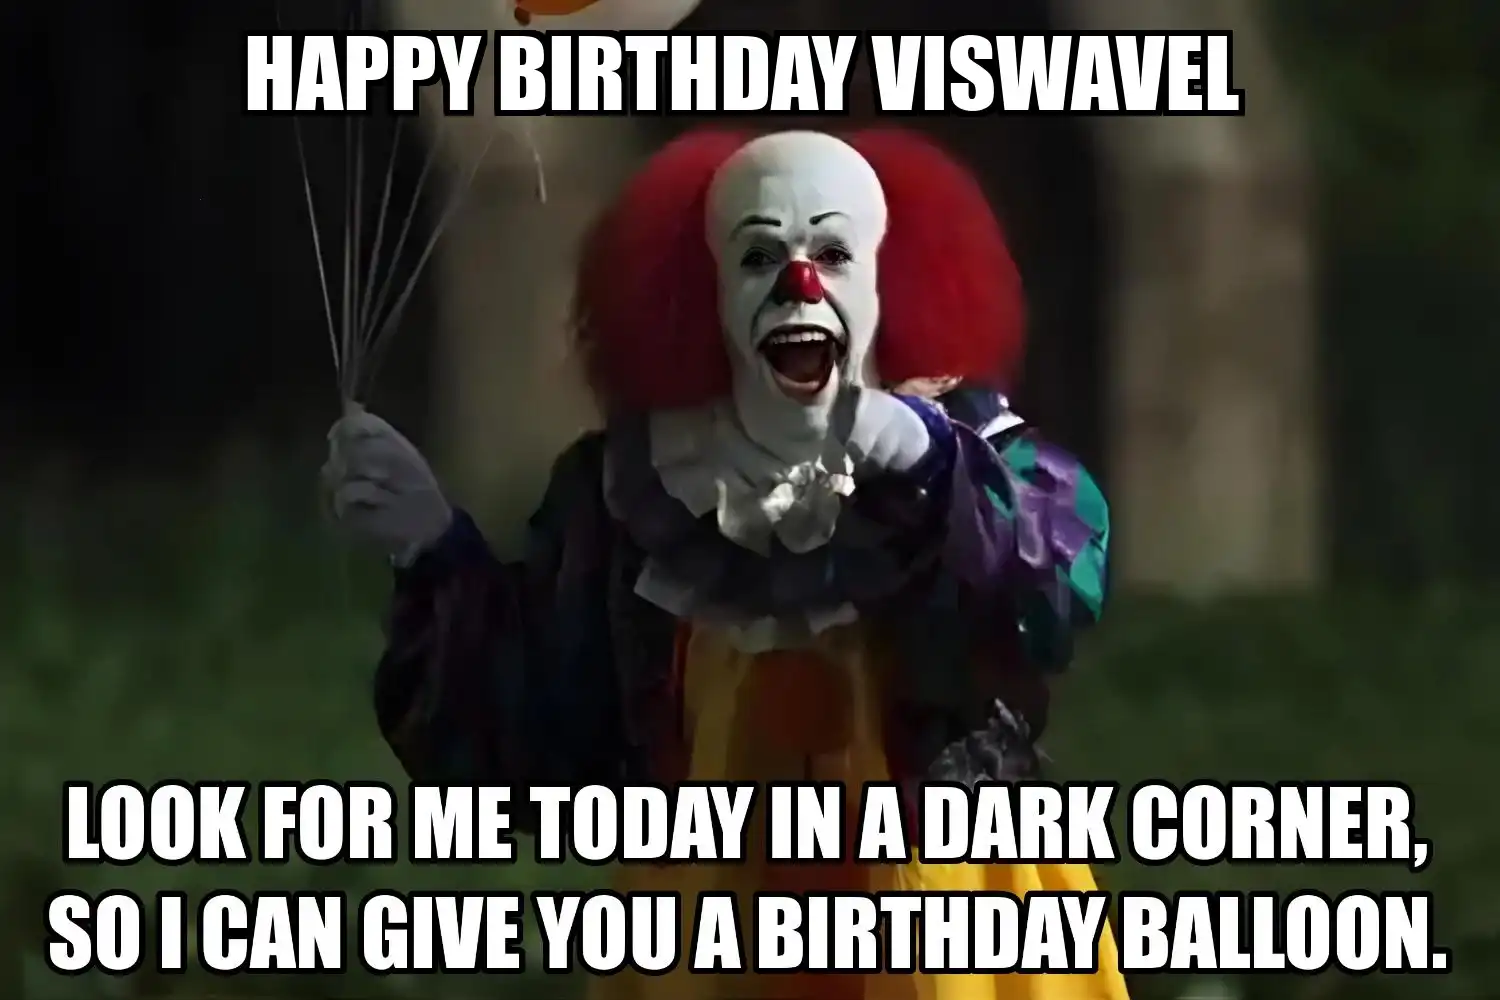 Happy Birthday Viswavel I Can Give You A Balloon Meme